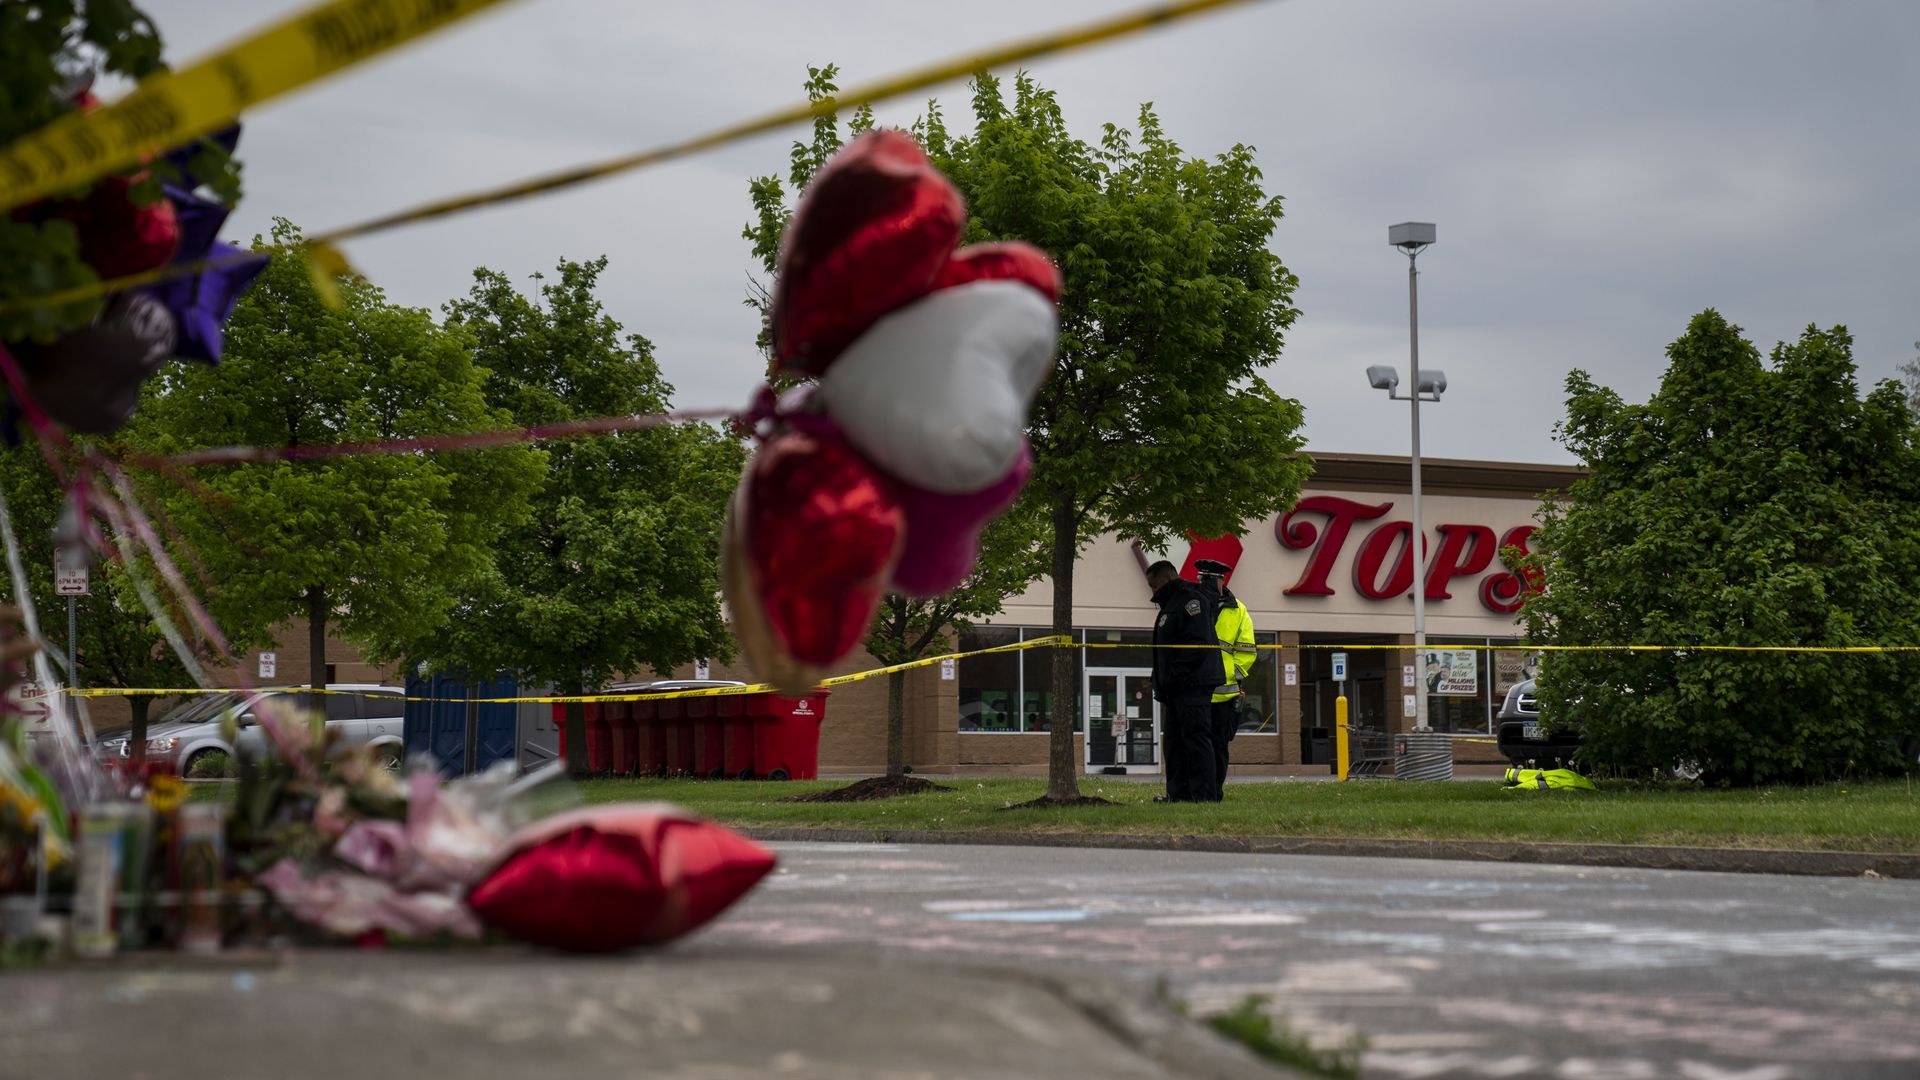 Photo of balloons and police yellow tape in the foreground with the Tops grocery store building in focus